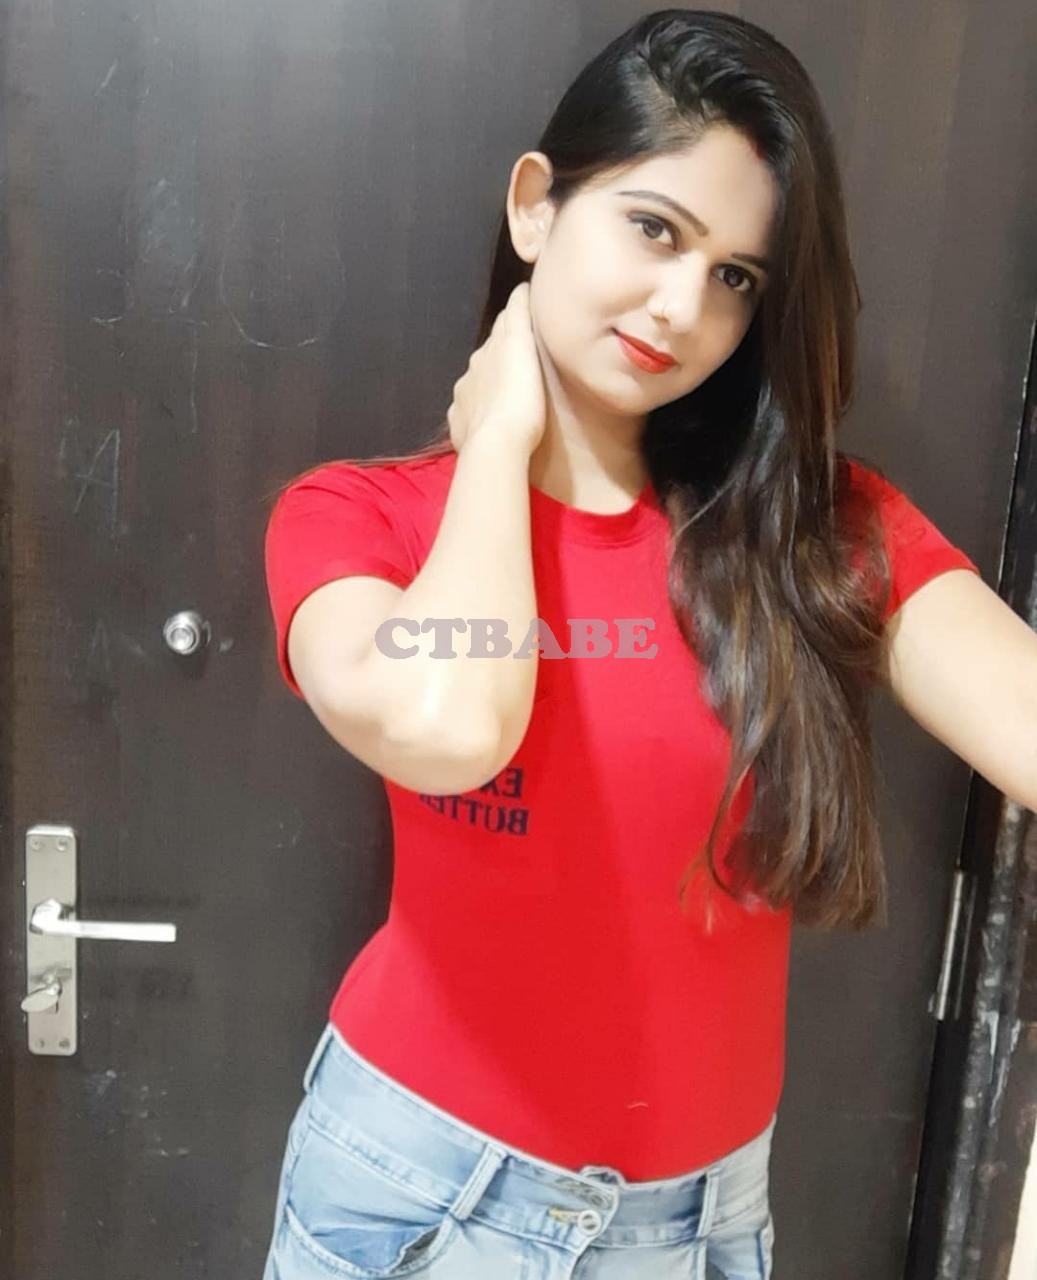  Hyderabad 24x7 AFFORDABLE CHEAPEST RATE SAFE CALL GIRL SERVICE AVAILABLE OUTCA